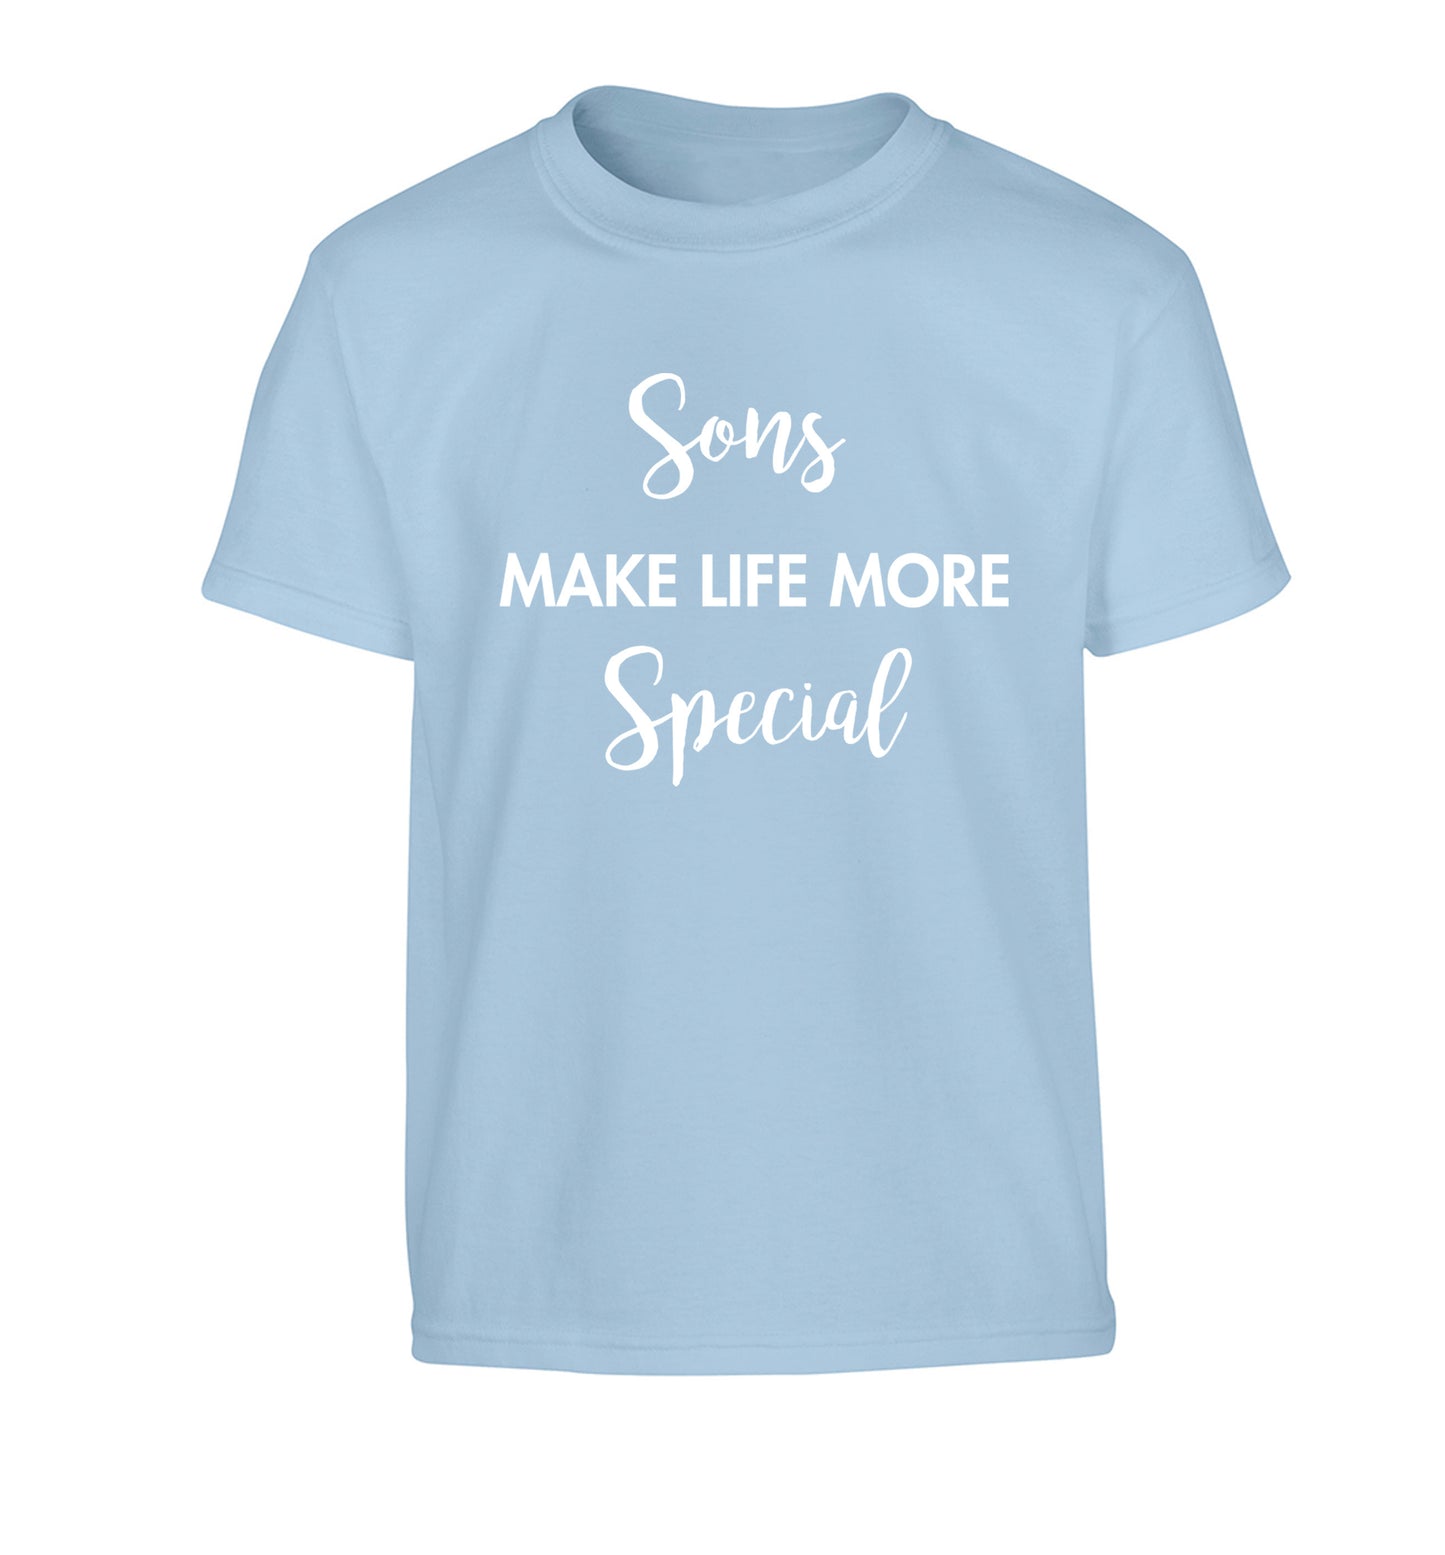 Daughters make life more special Children's light blue Tshirt 12-14 Years